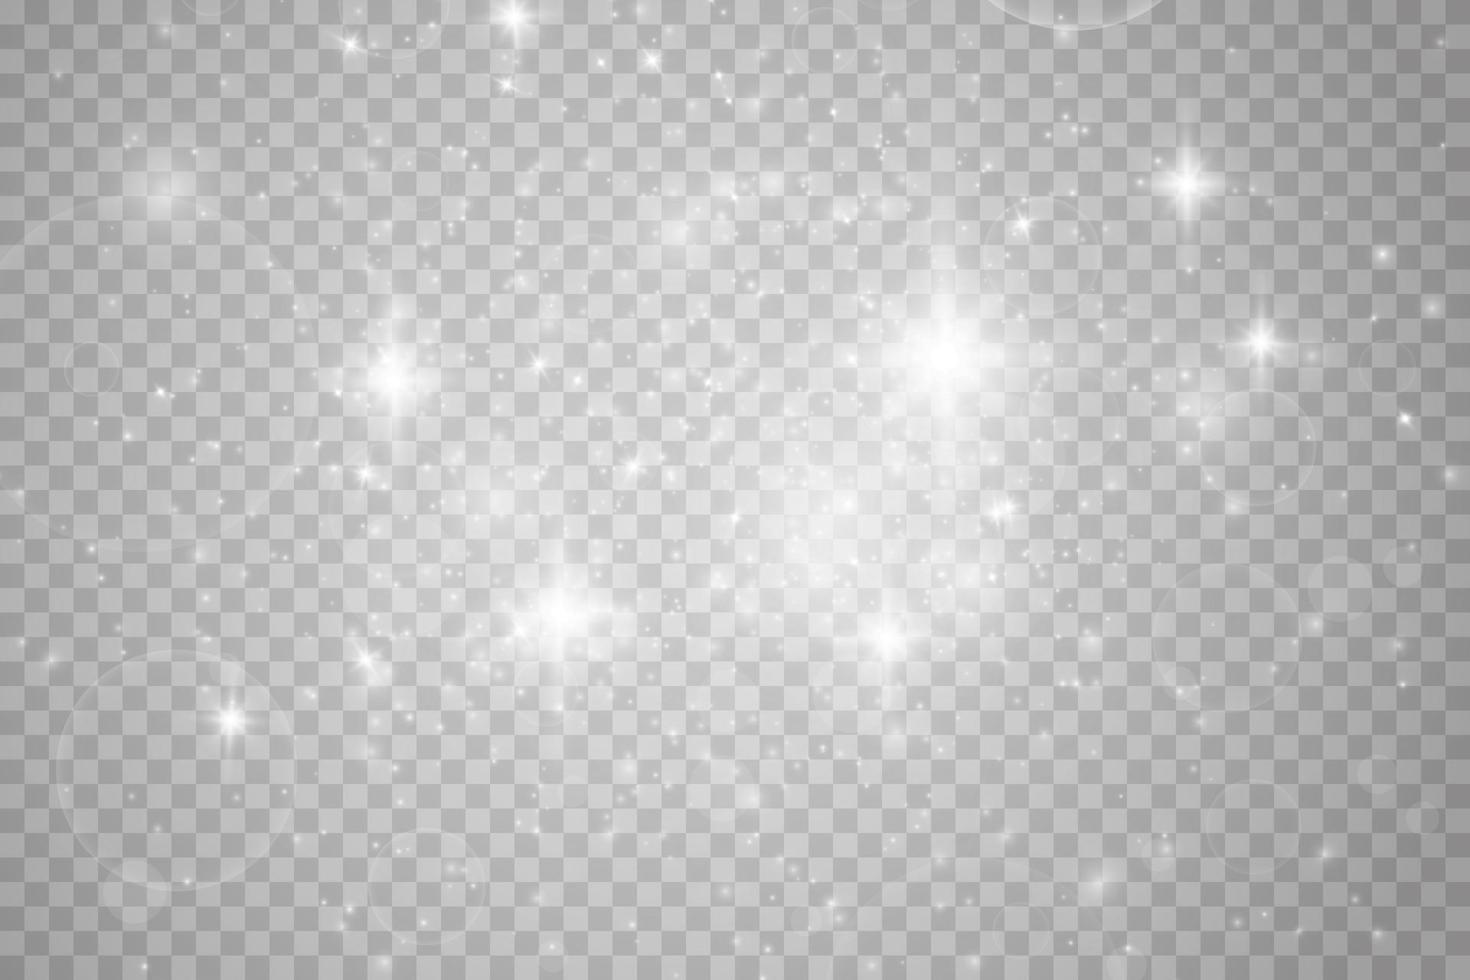 White glowing lights effects isolated on transparent background. Christmas lights. Solar flare with beams and spotlight. Glow effect. Starburst with sparkles for cards and holiday backgrounds. vector